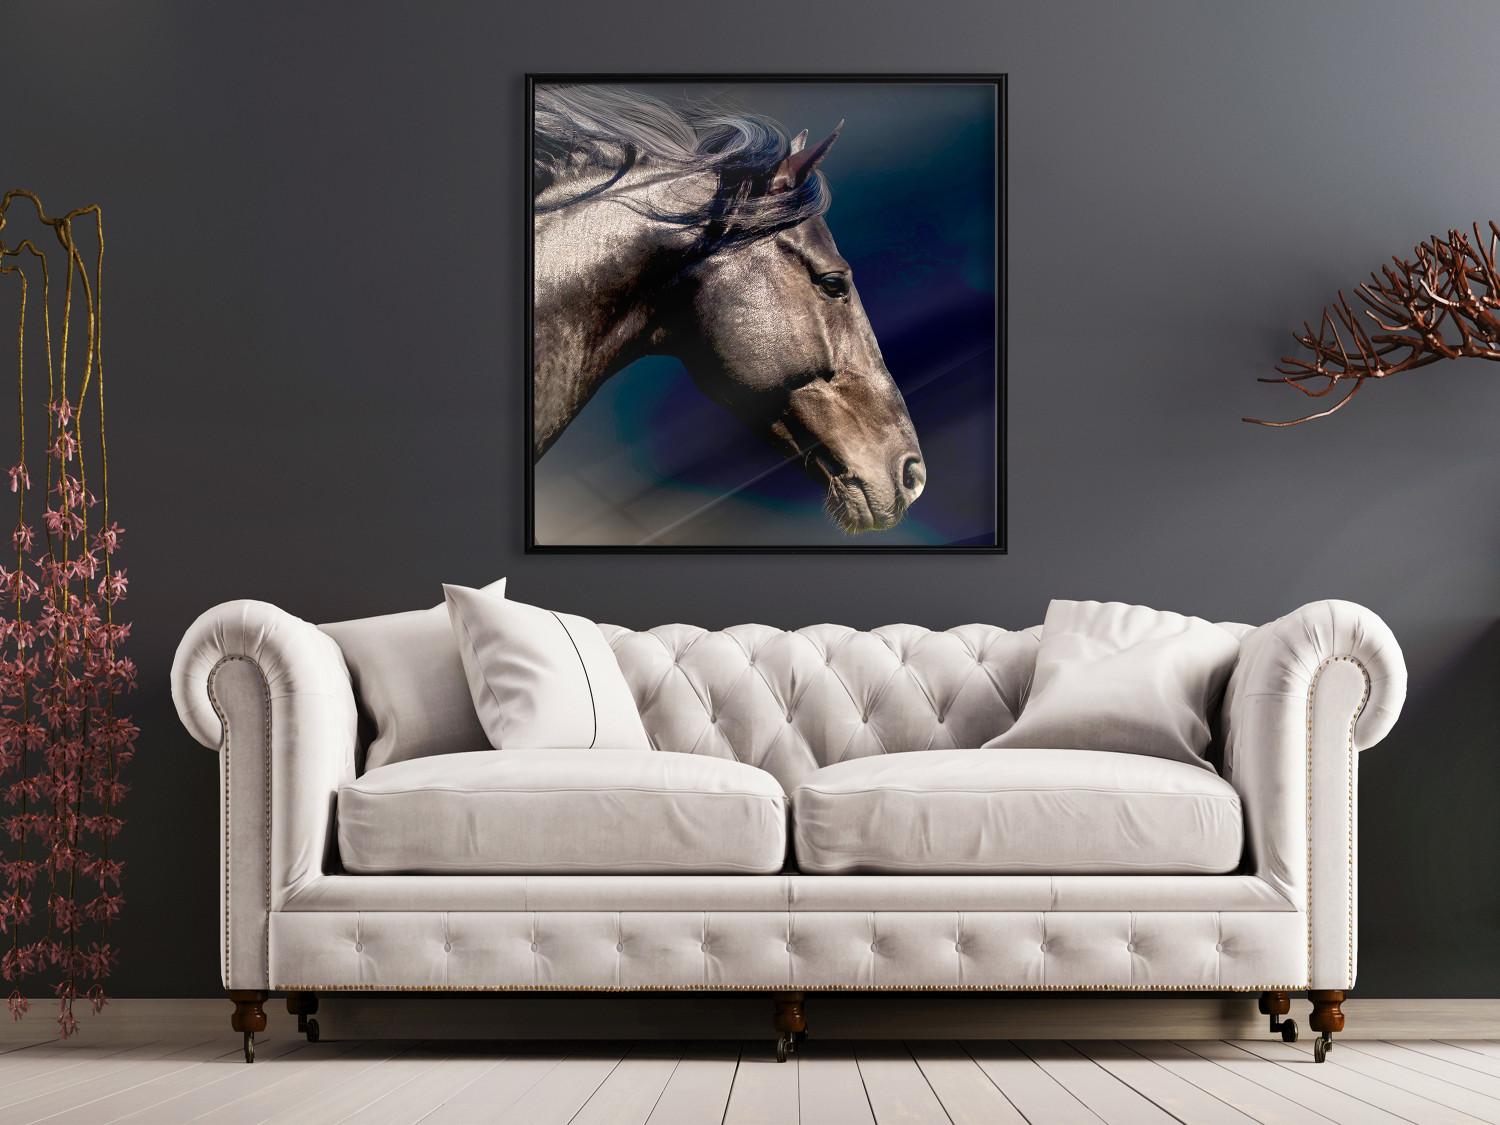 Gallery wall Dappled Majesty - composition with a portrait of a brown horse on a black background